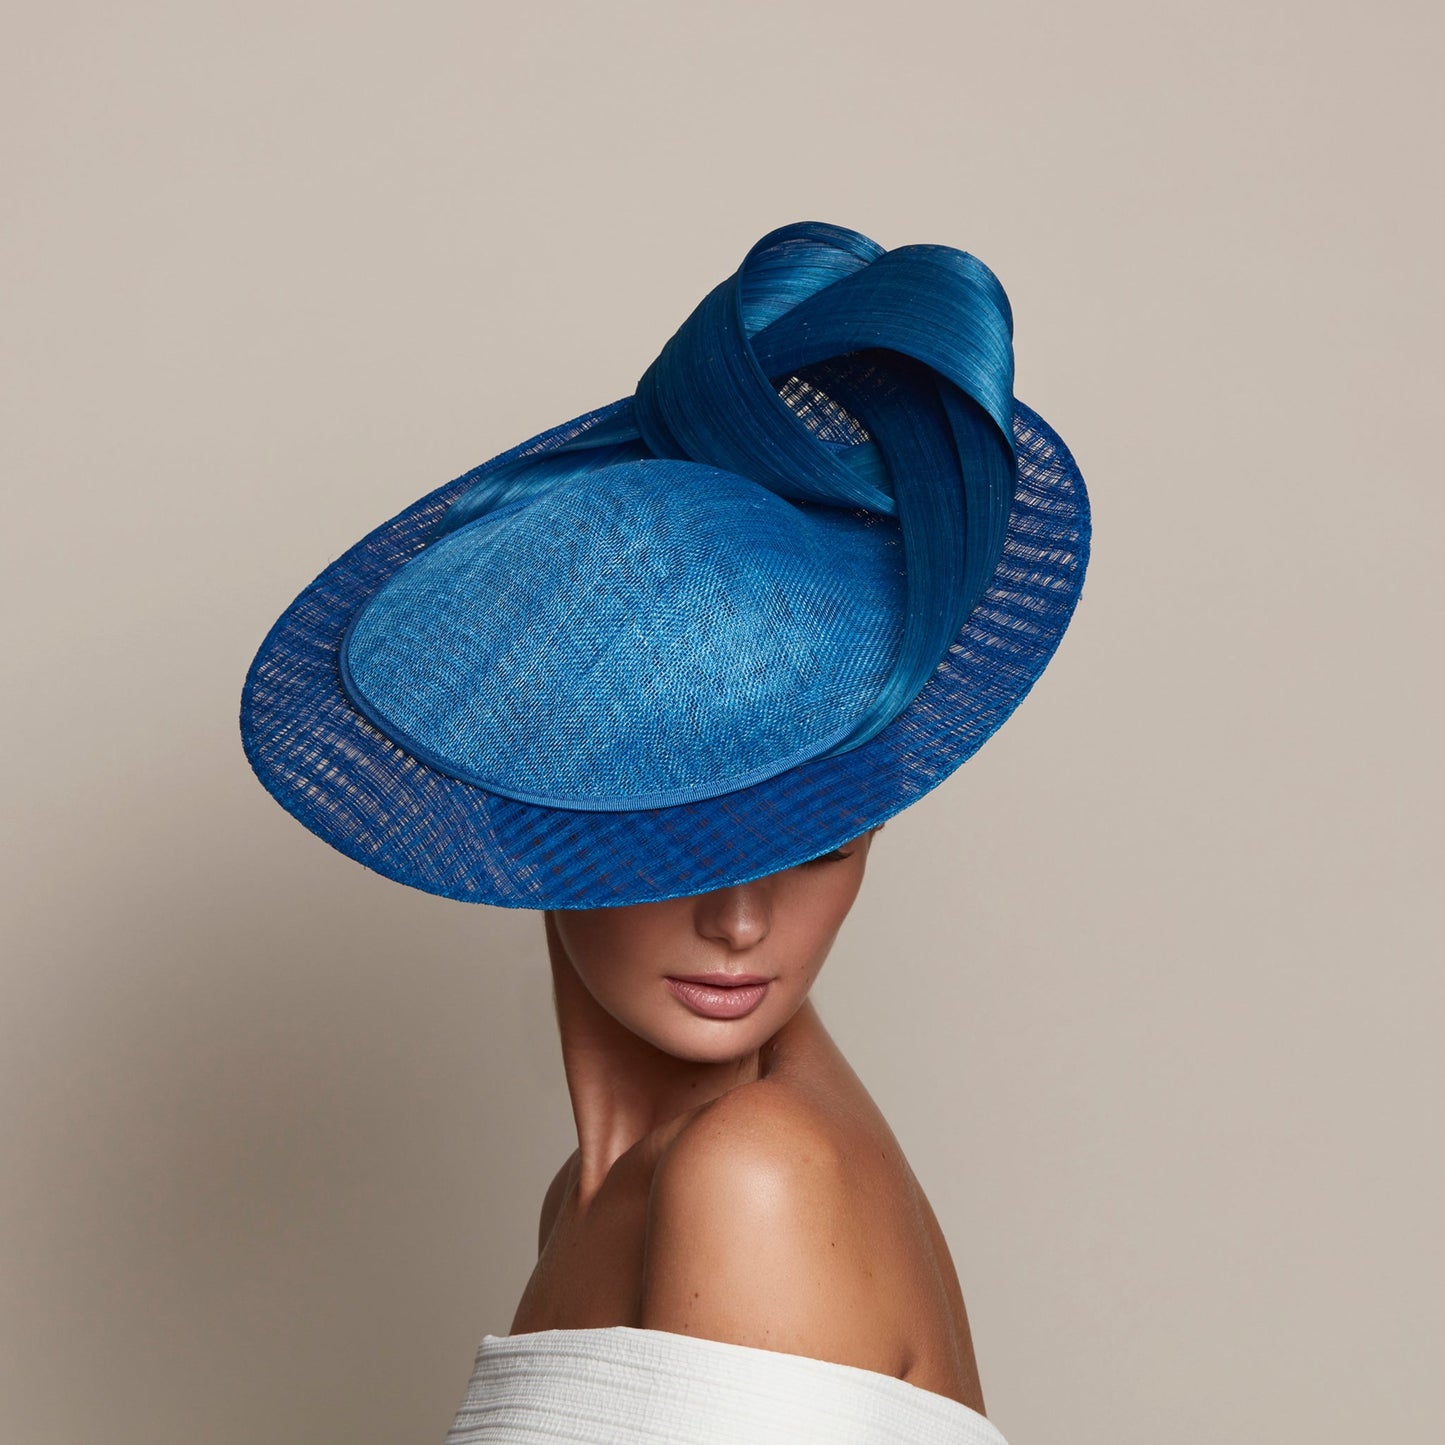 Royal blue hat for Ascot